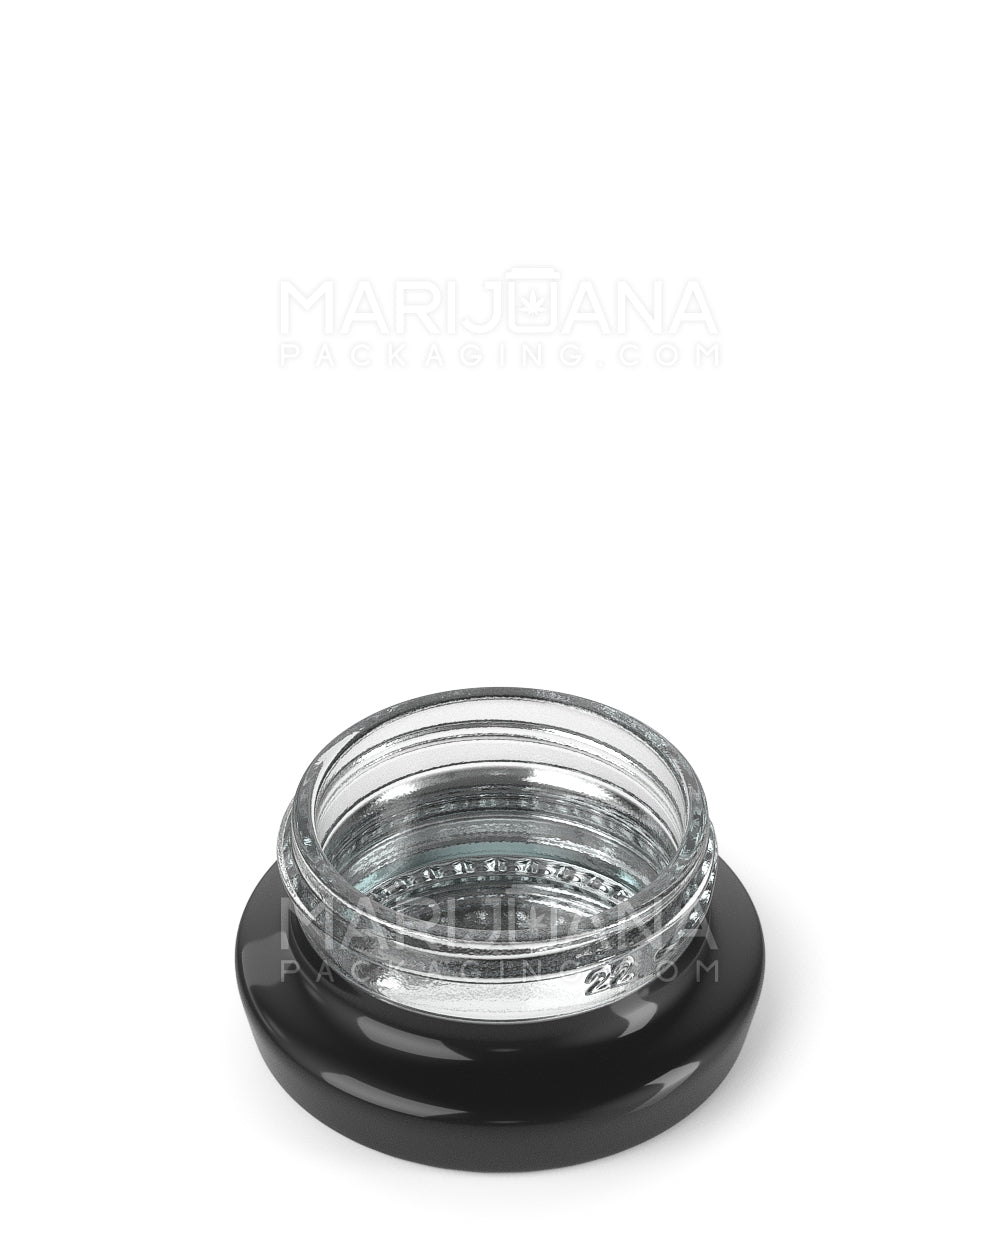 Black Glass Concentrate Containers / Silver Interior | 38mm - 9mL - 240 Count